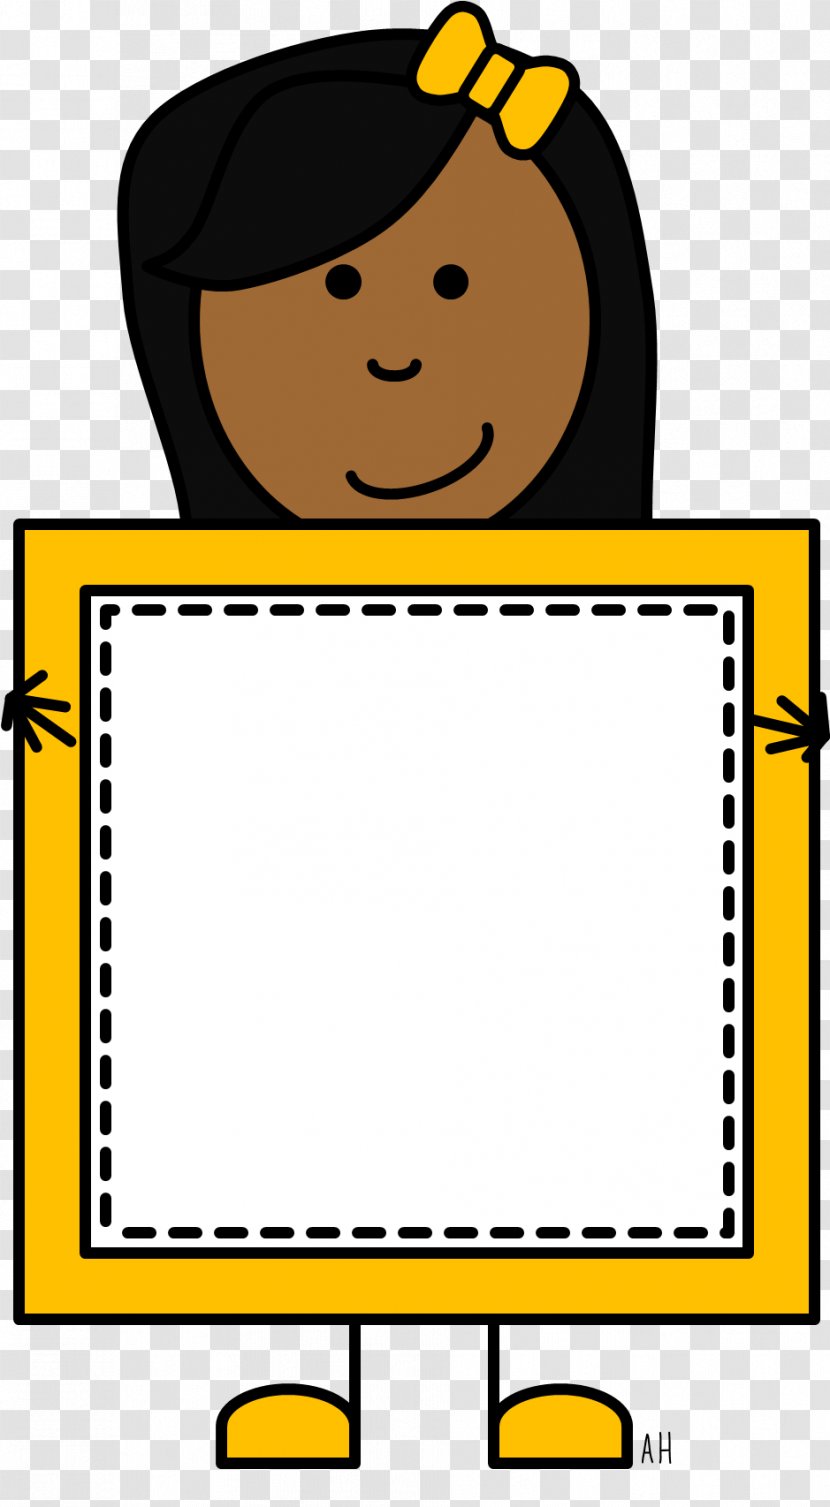 Cartoon Book - Classroom - Pleased Smiley Transparent PNG